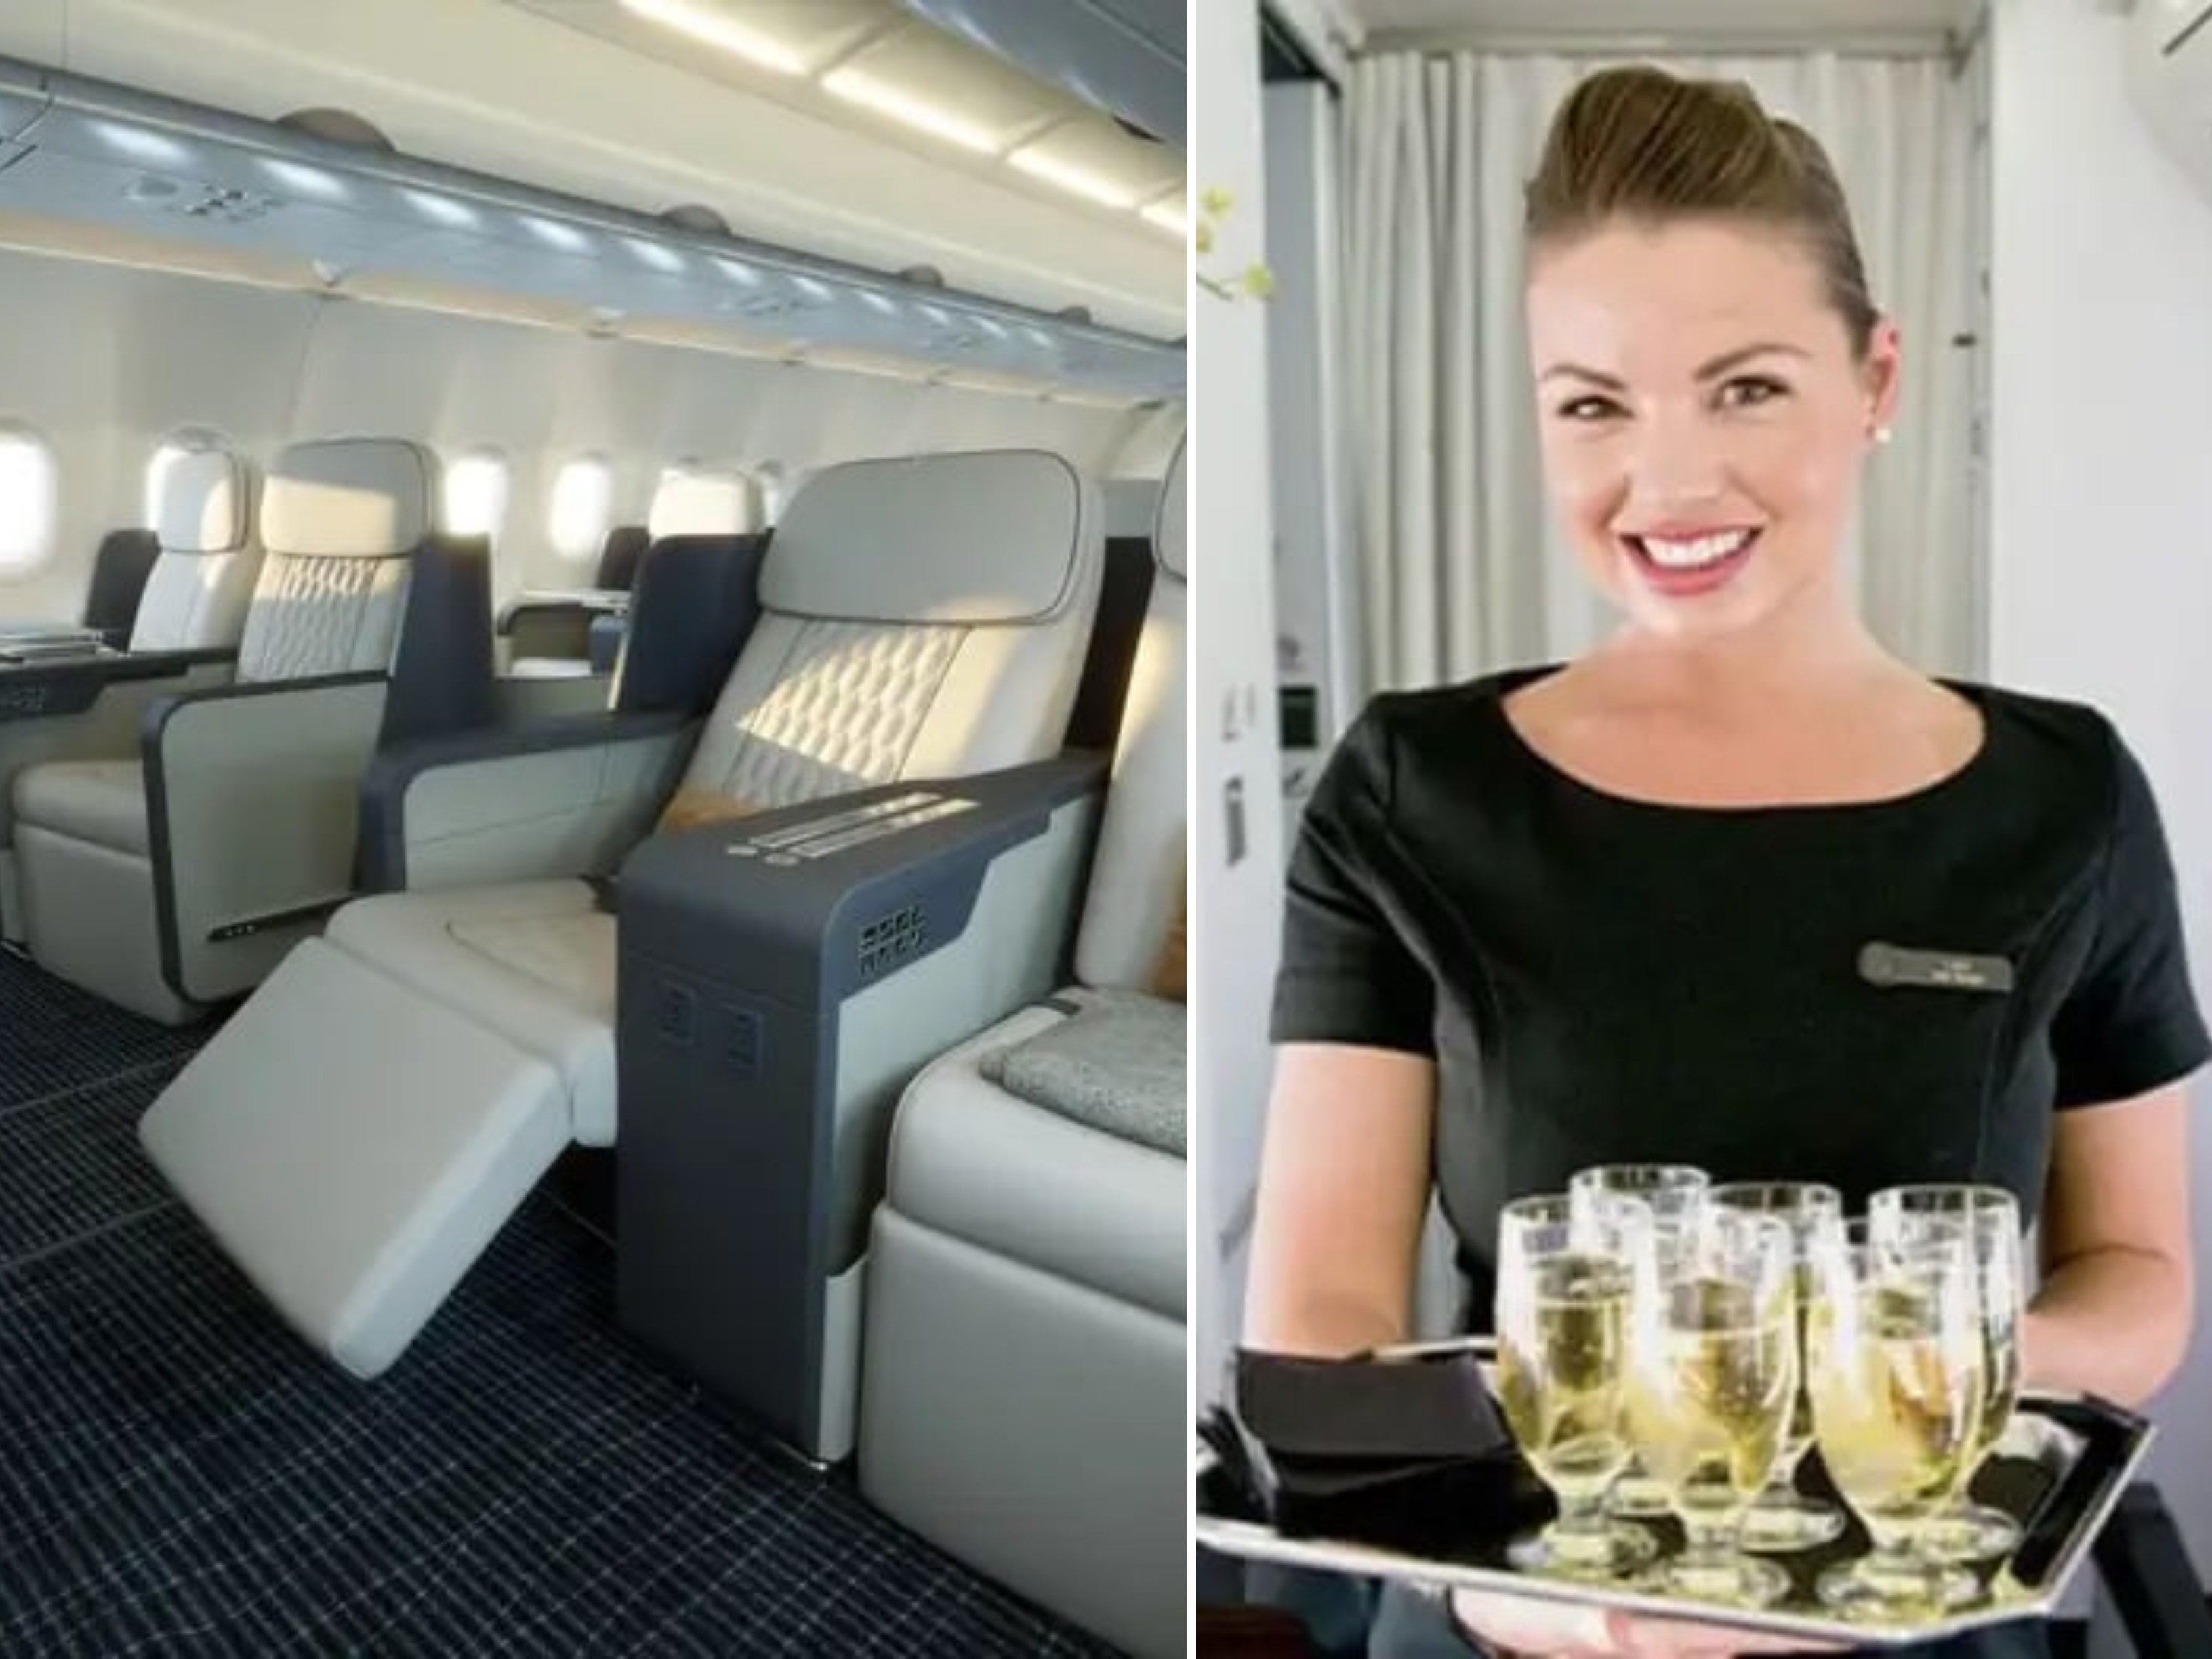 Private jets can take passengers across the globe while being equipped with five-star services and amenities. Photos: Handout